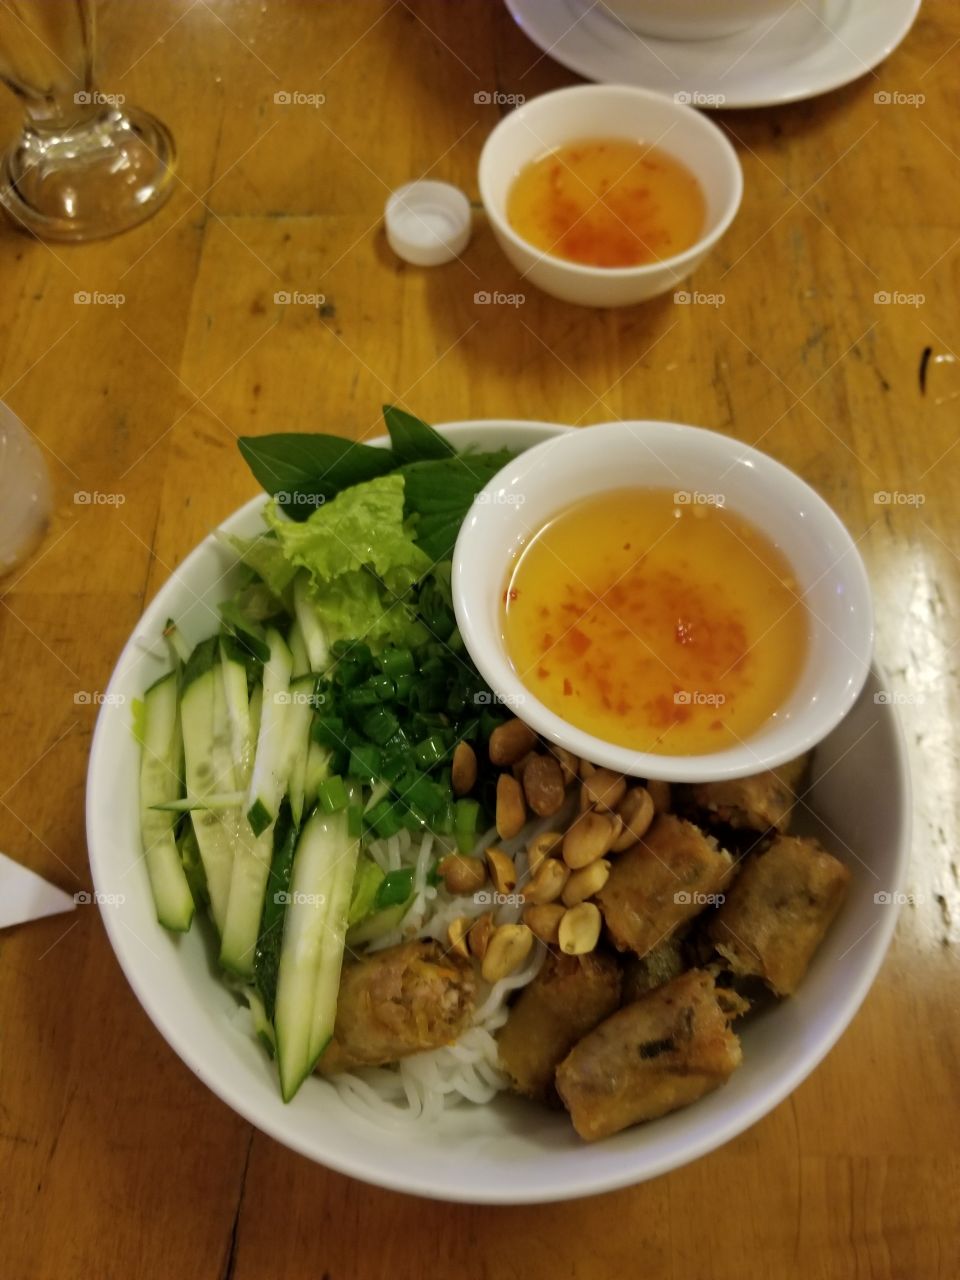 It is the famous Vietnamese Cold Vermicelli. It is served with fish sauce, garlic, spring rolls, cucumber, nuts, lemon grass and vermicelli.